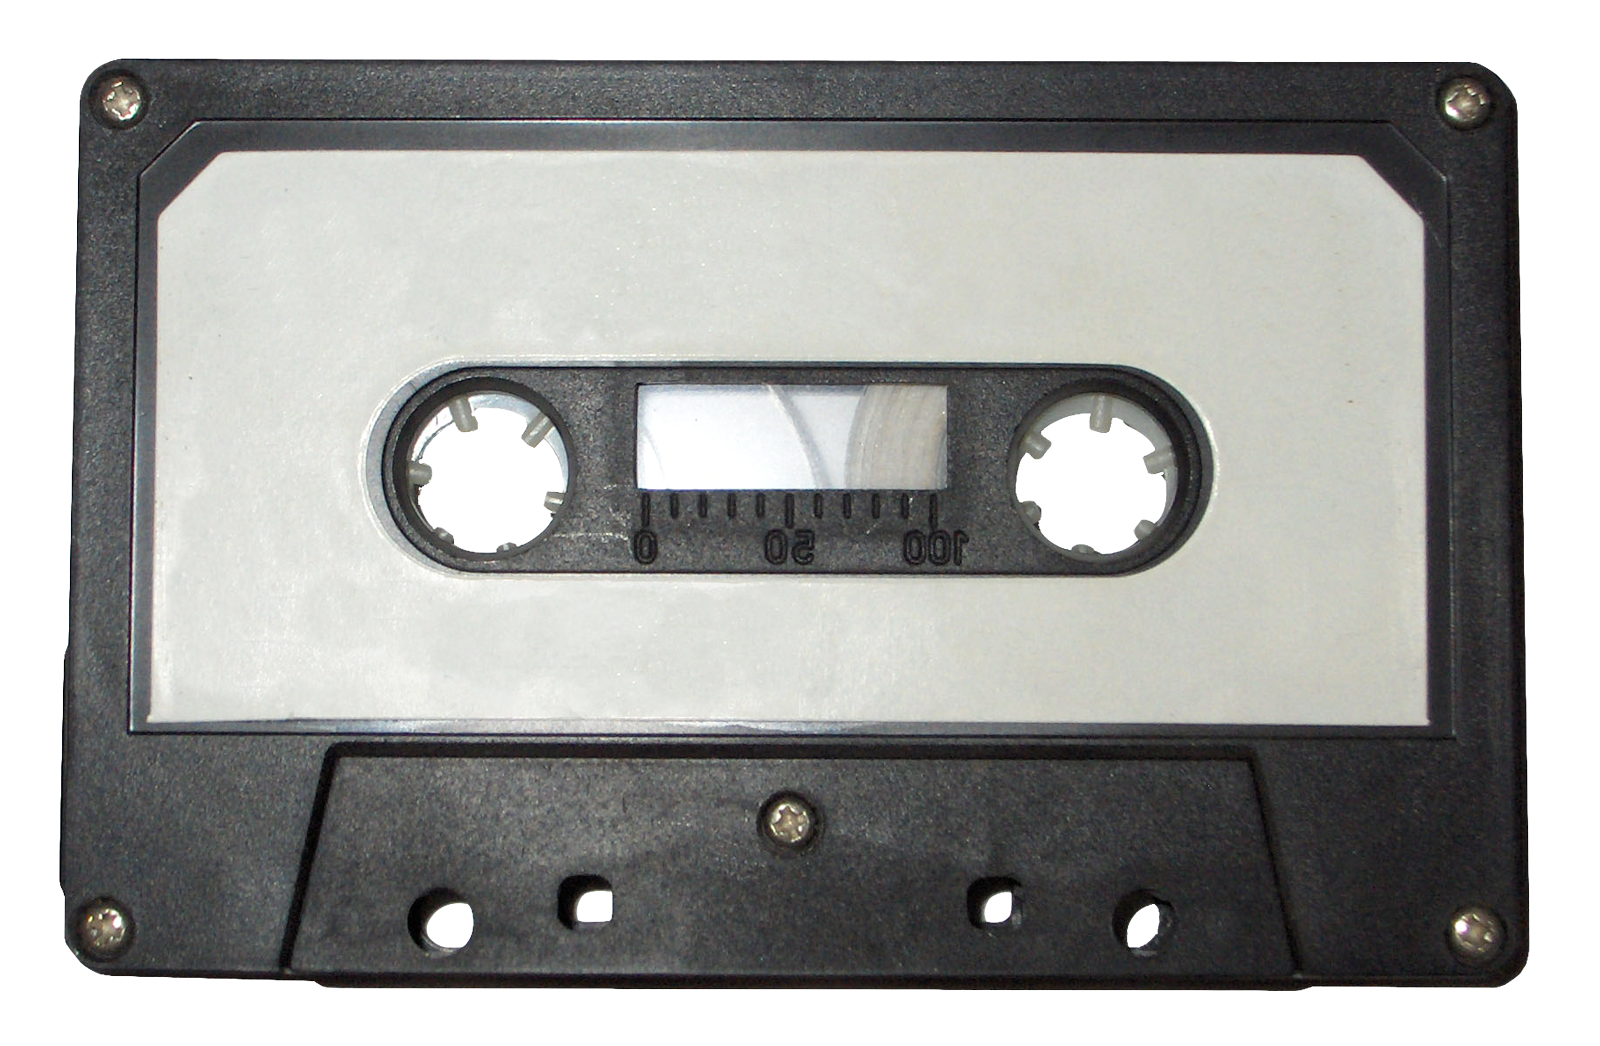 A Close Up Of A Cassette Tape